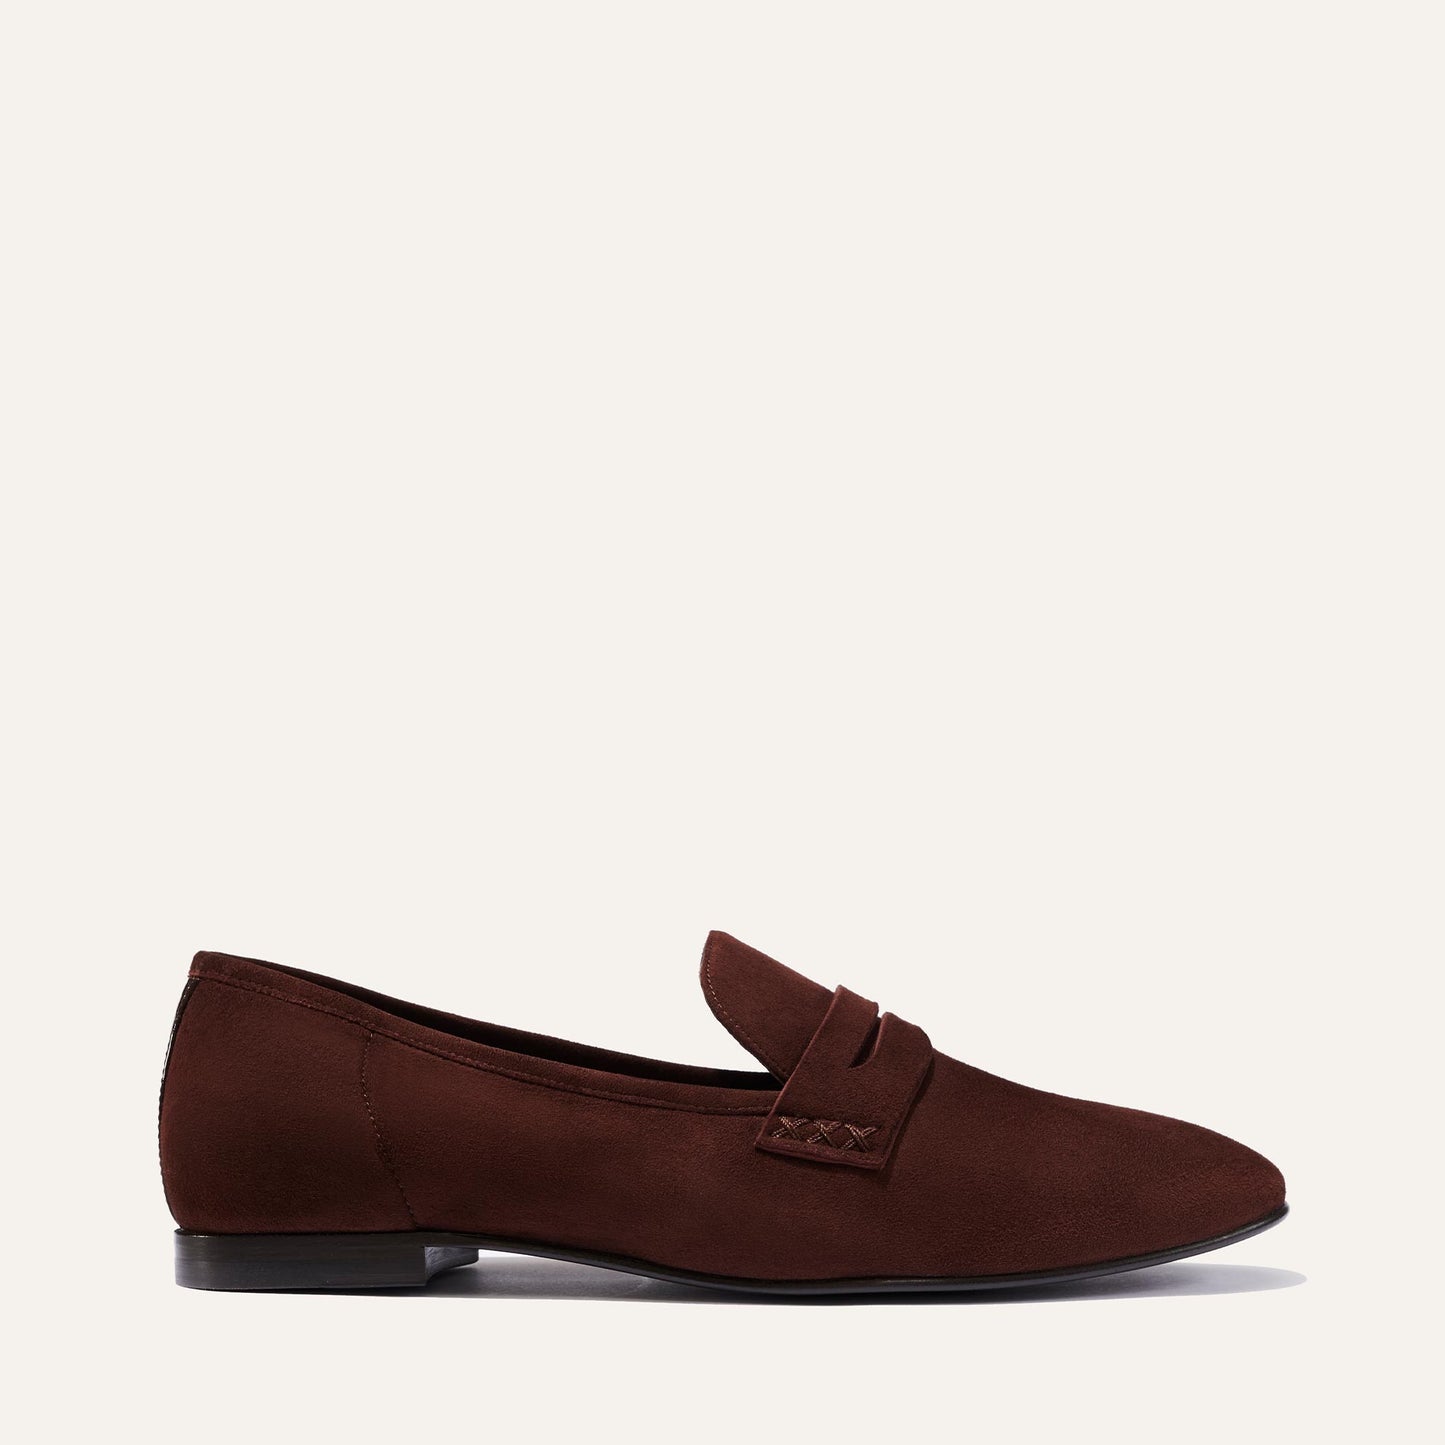 Margaux's classic and comfortable Penny loafer, made in a soft, chocolate brown Italian suede